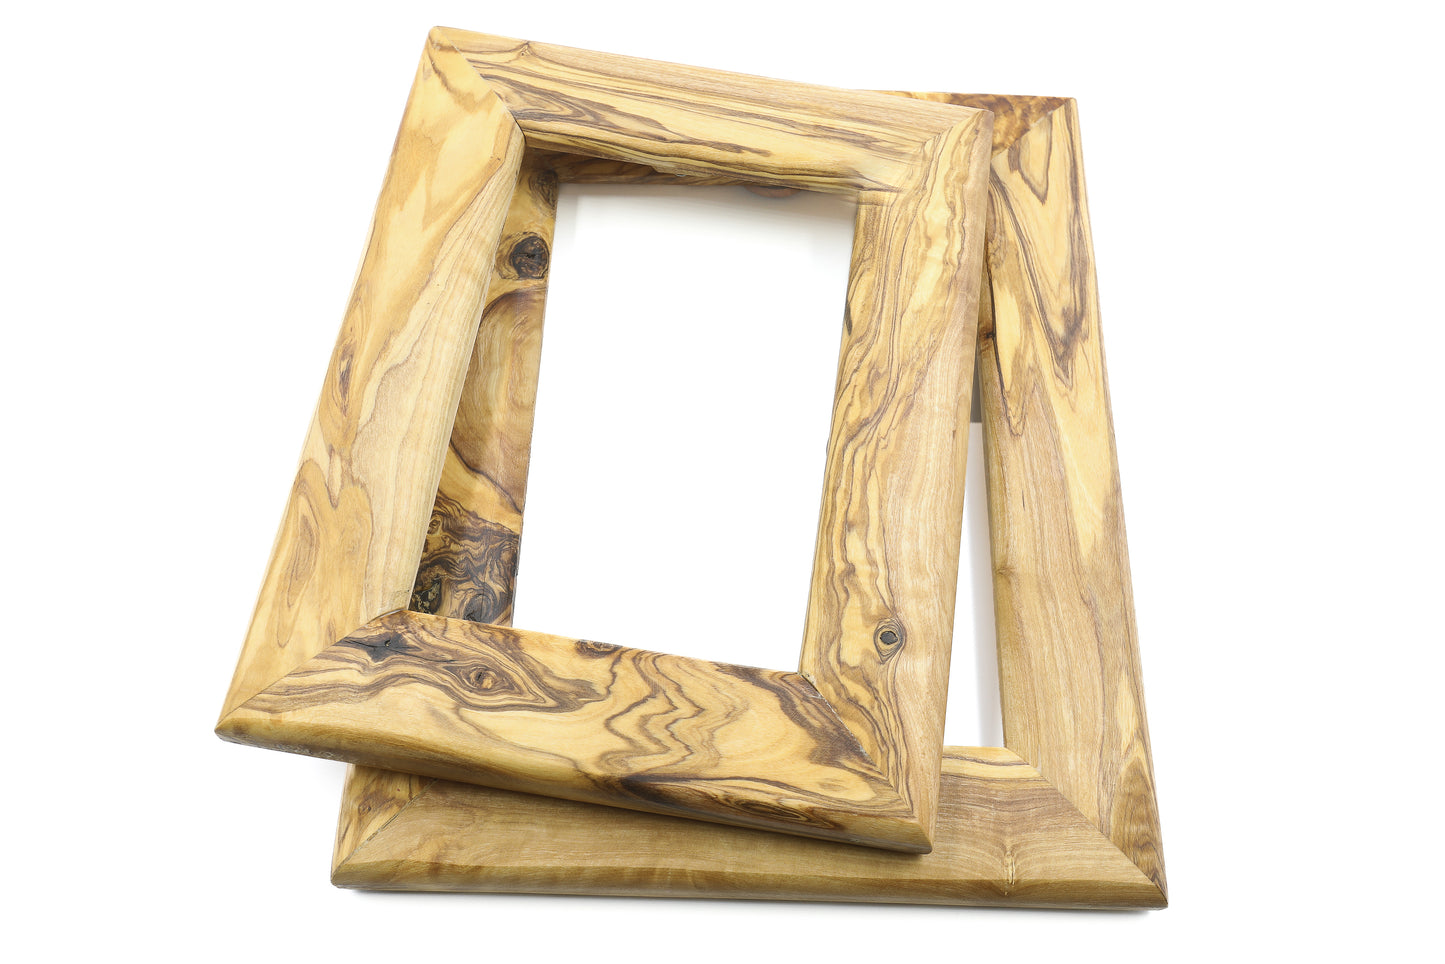 Rustic olive wood picture frame, a blend of nature and art